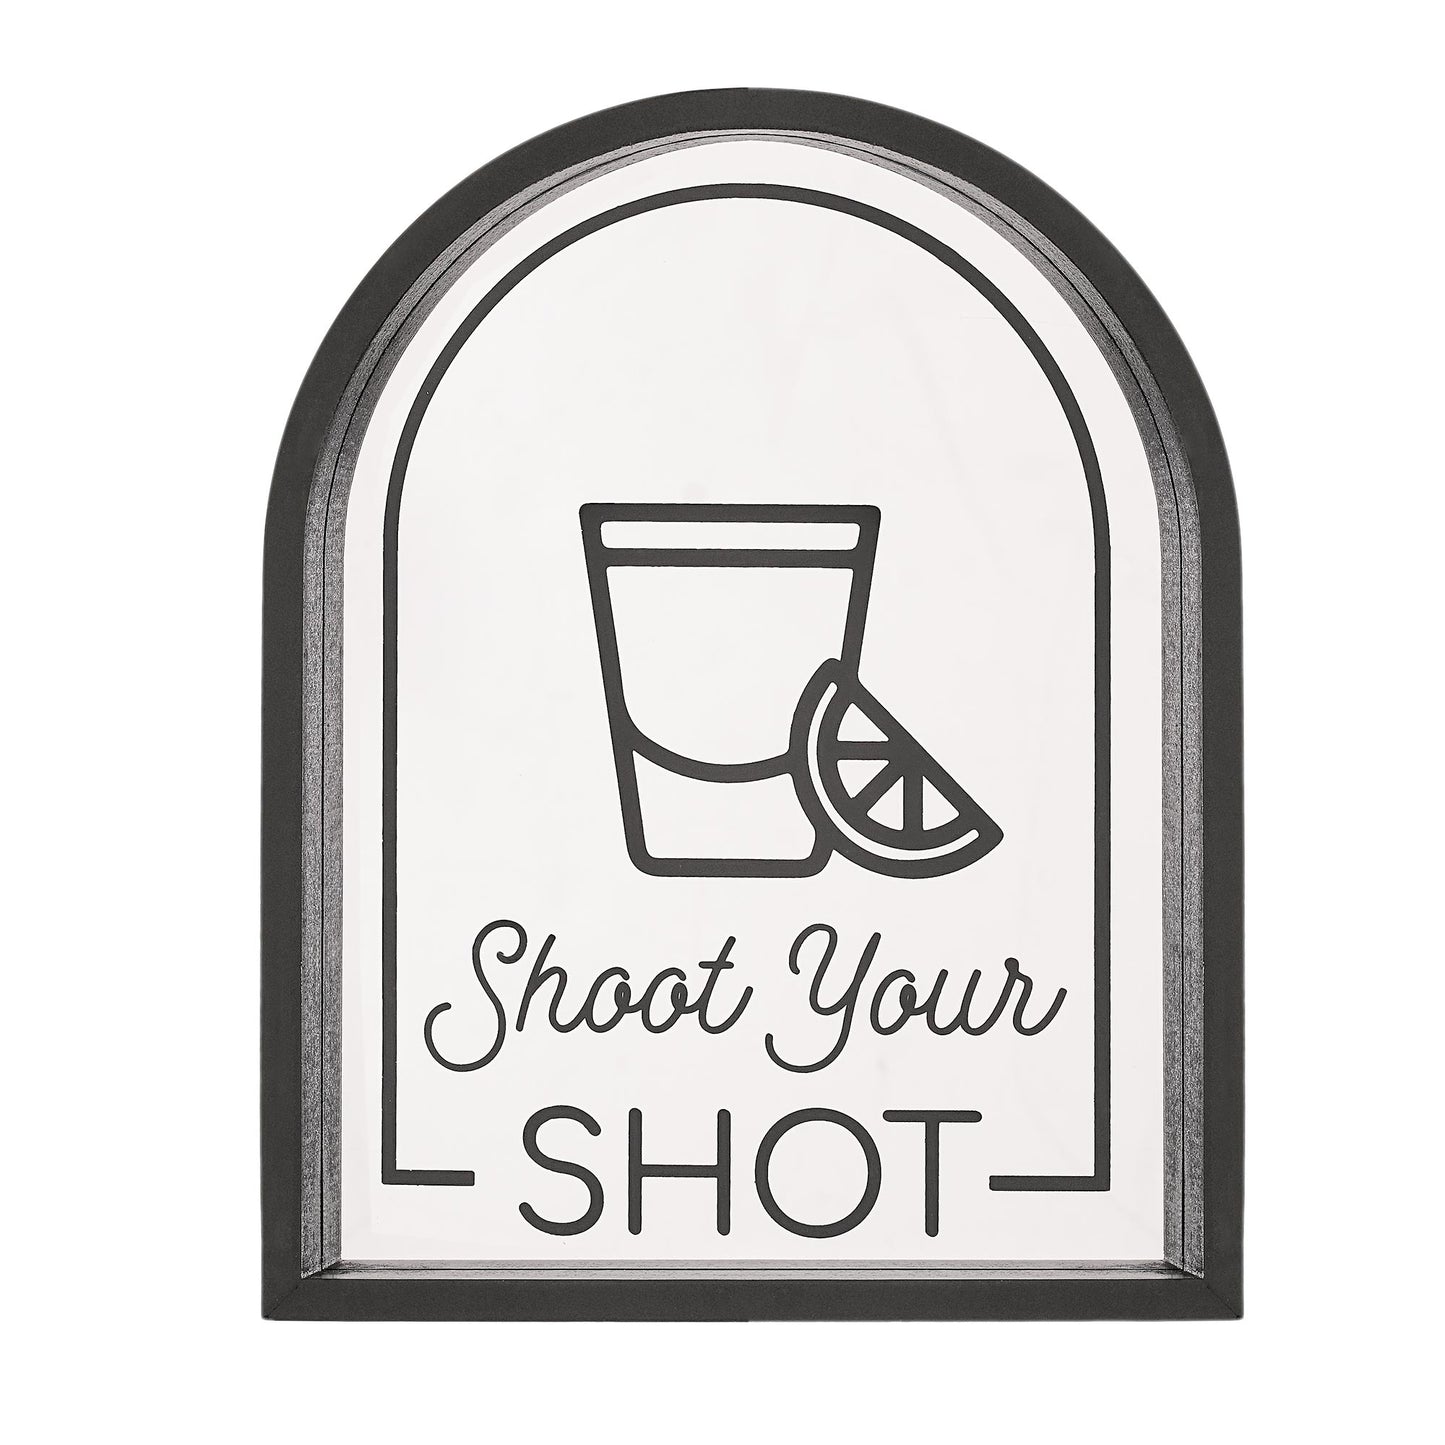 Shoot your Shot Printed Framed Mirror